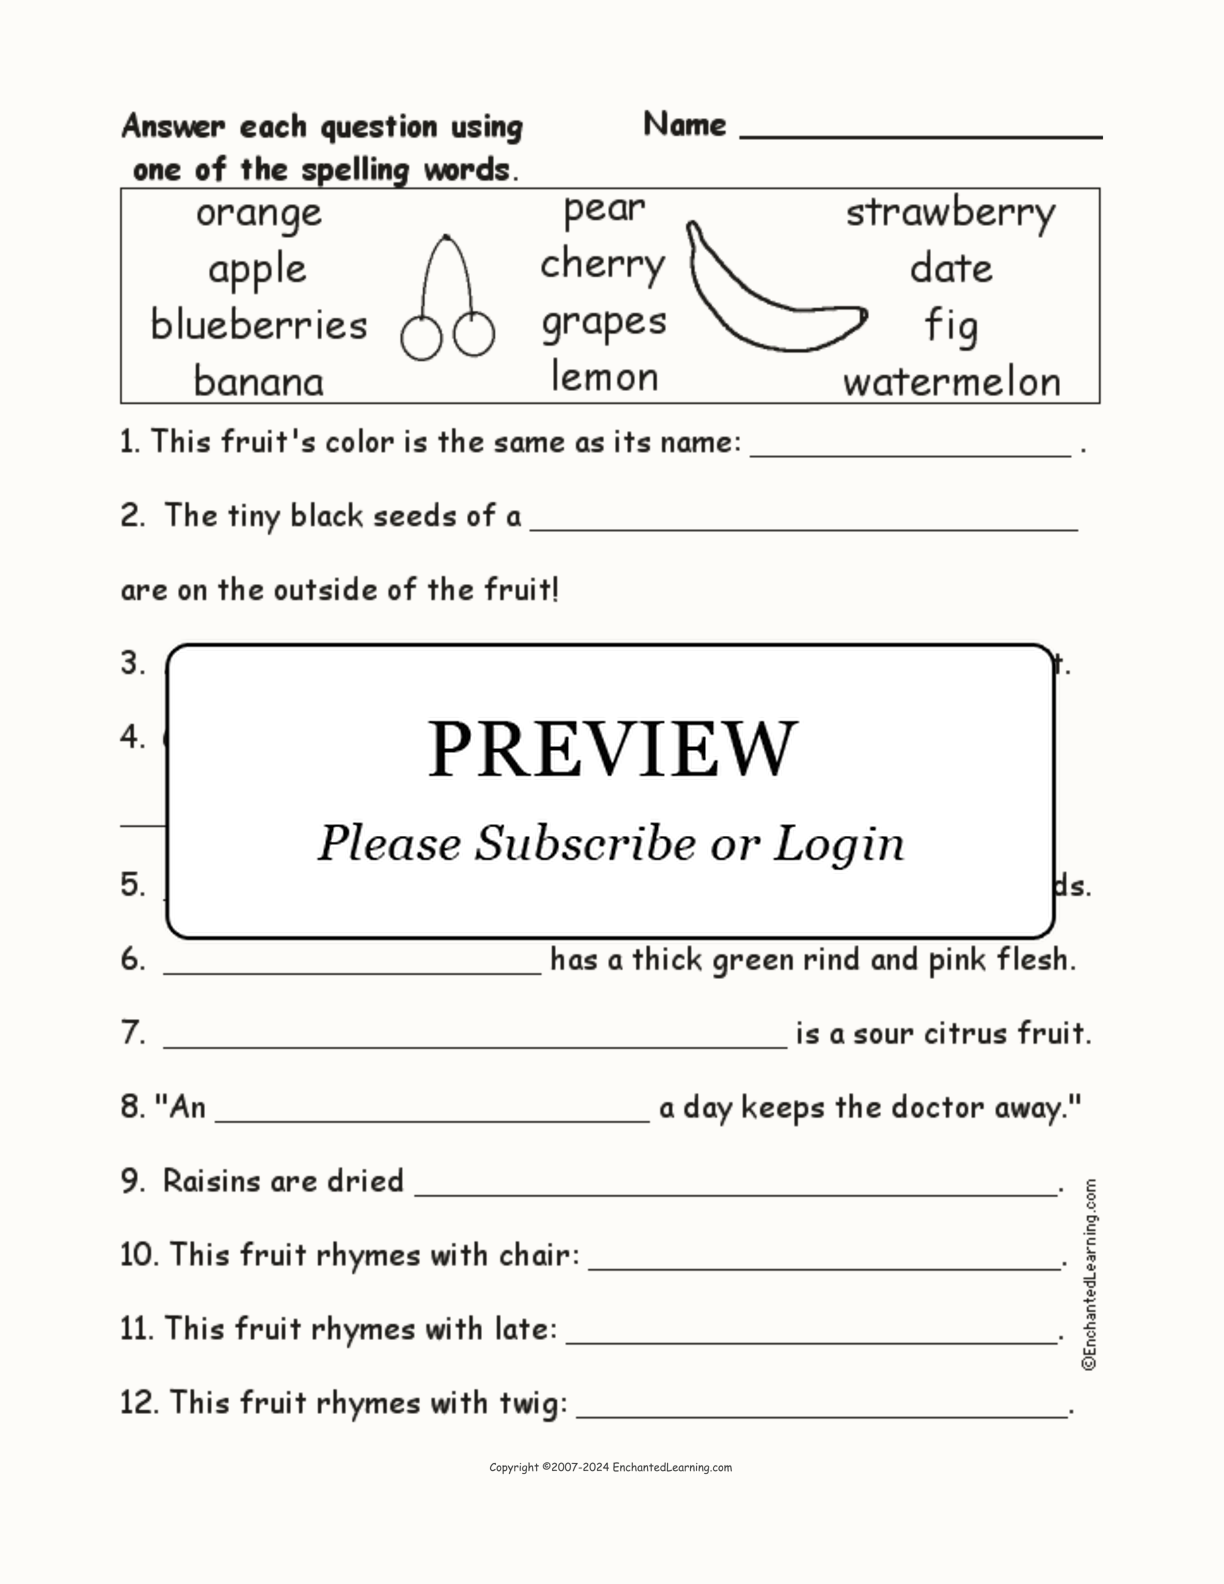 Fruit Spelling Word Questions interactive worksheet page 1